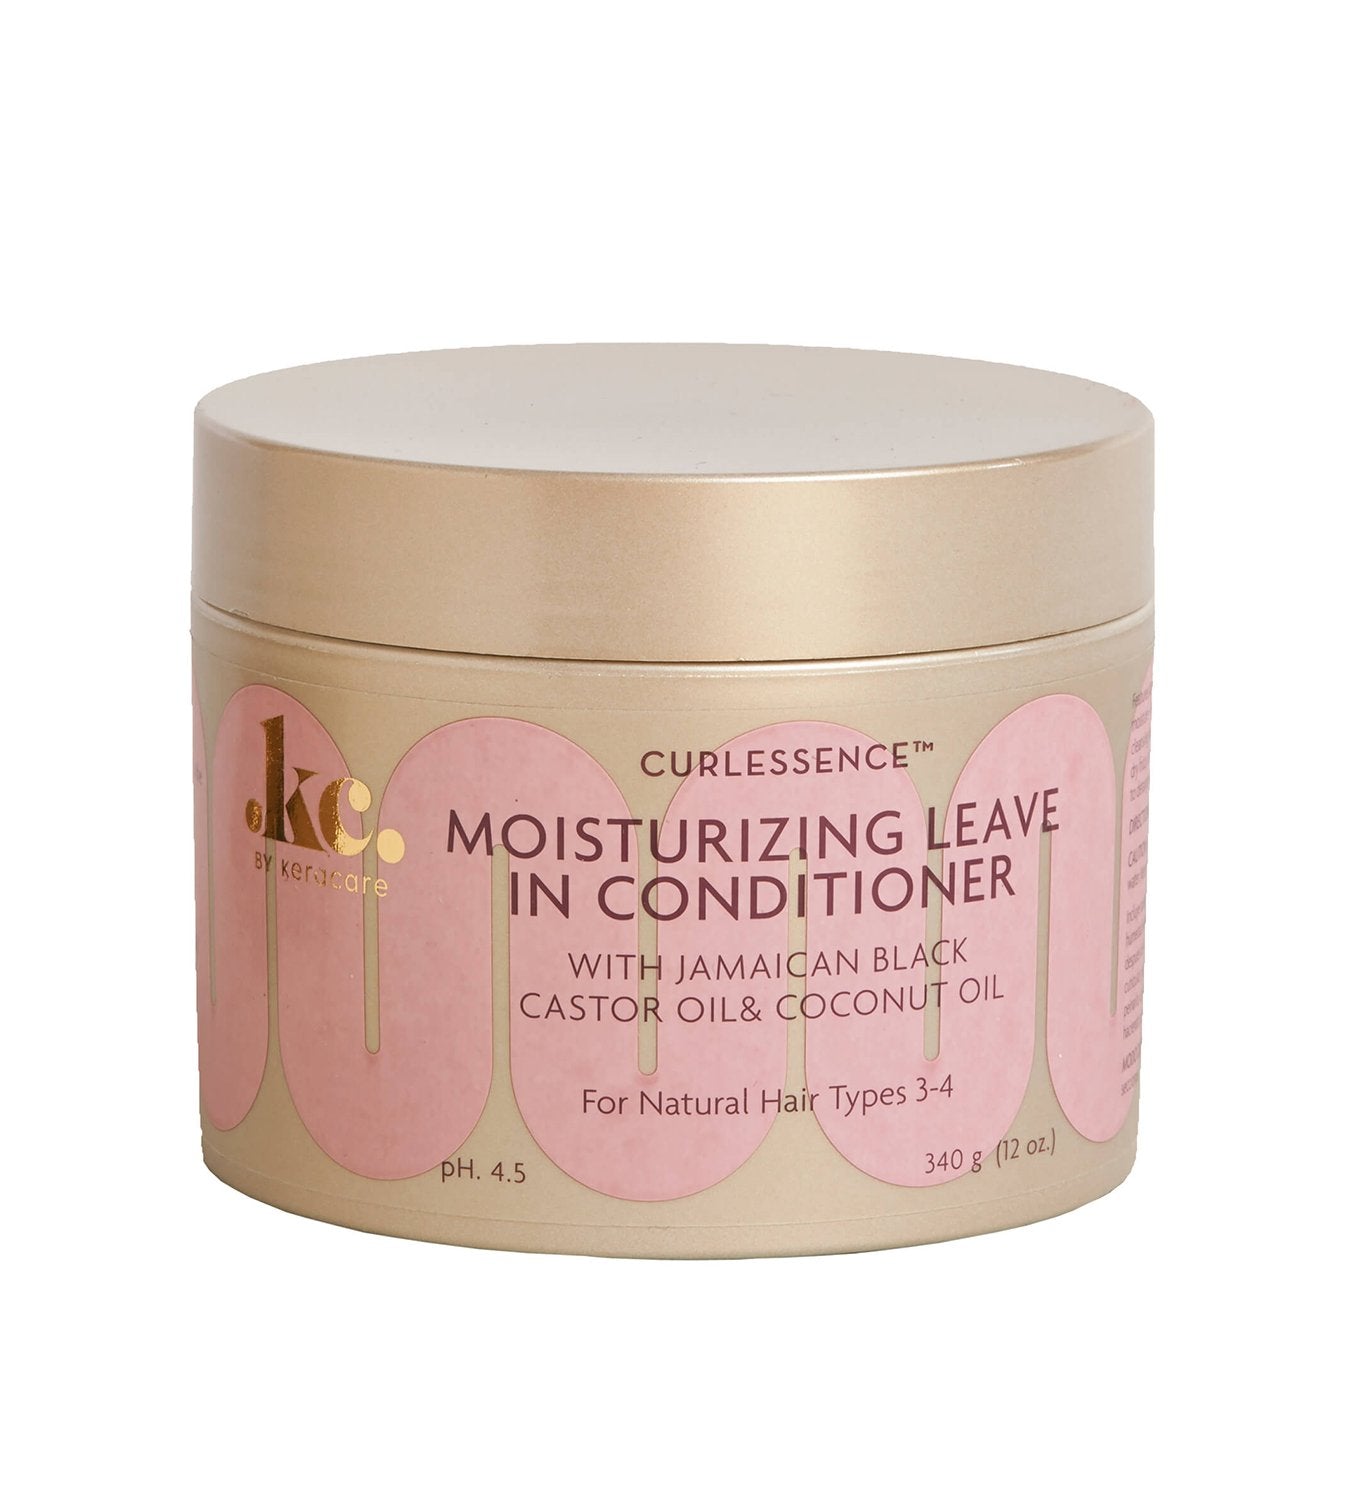 Keracare Curlessence Leave In Conditioner 340g- AQ Online